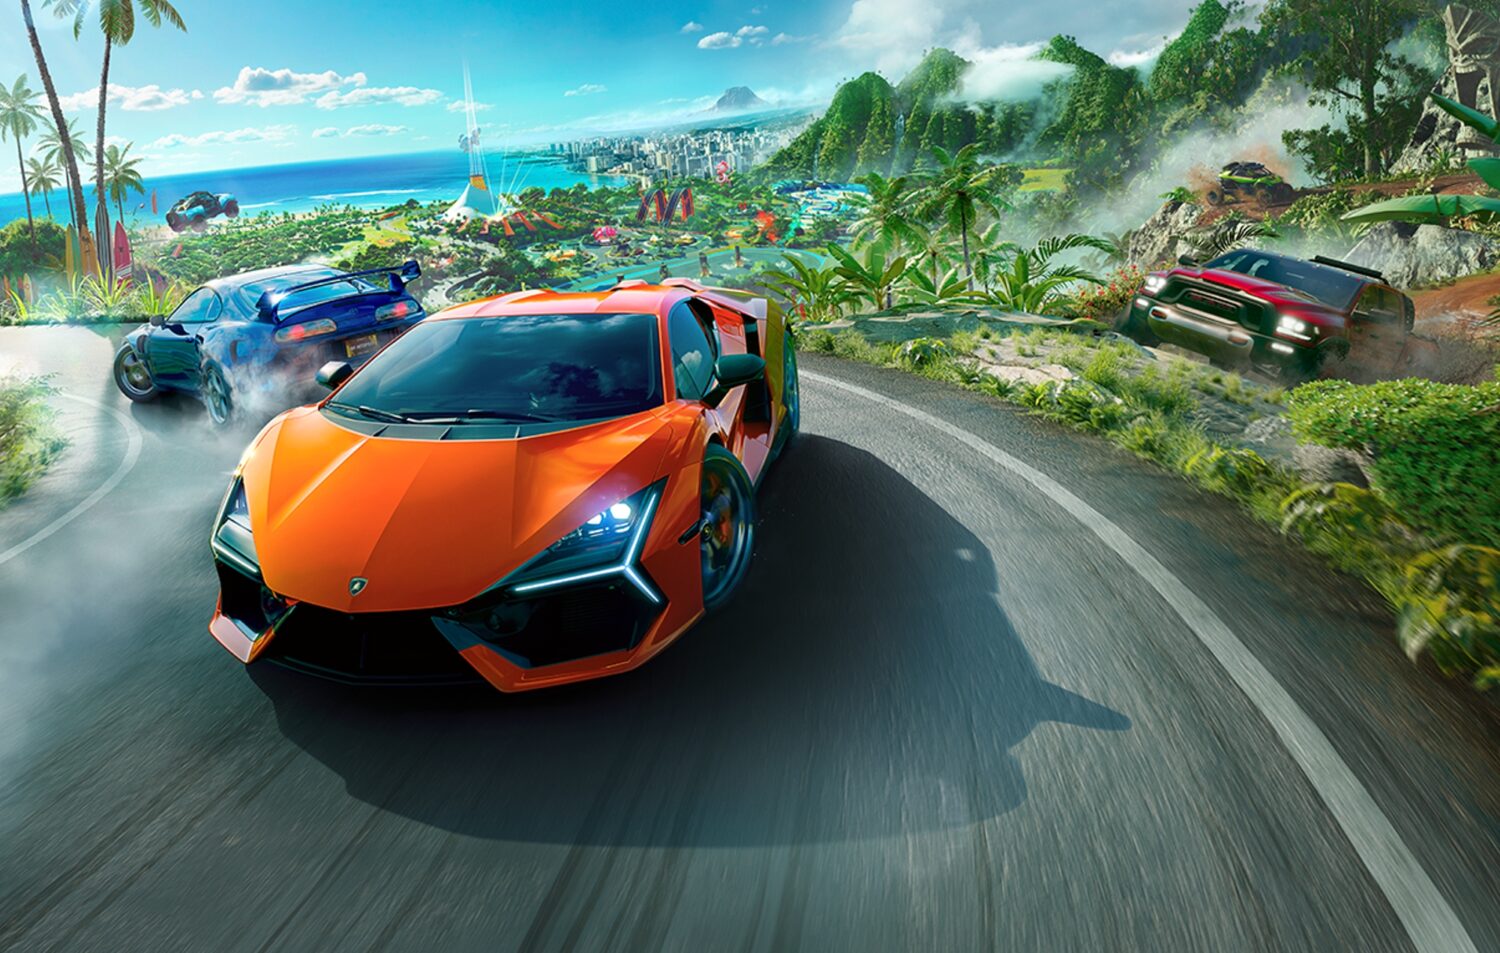 The Crew 2 PC performance review: Ubisoft delivers an uninspiring